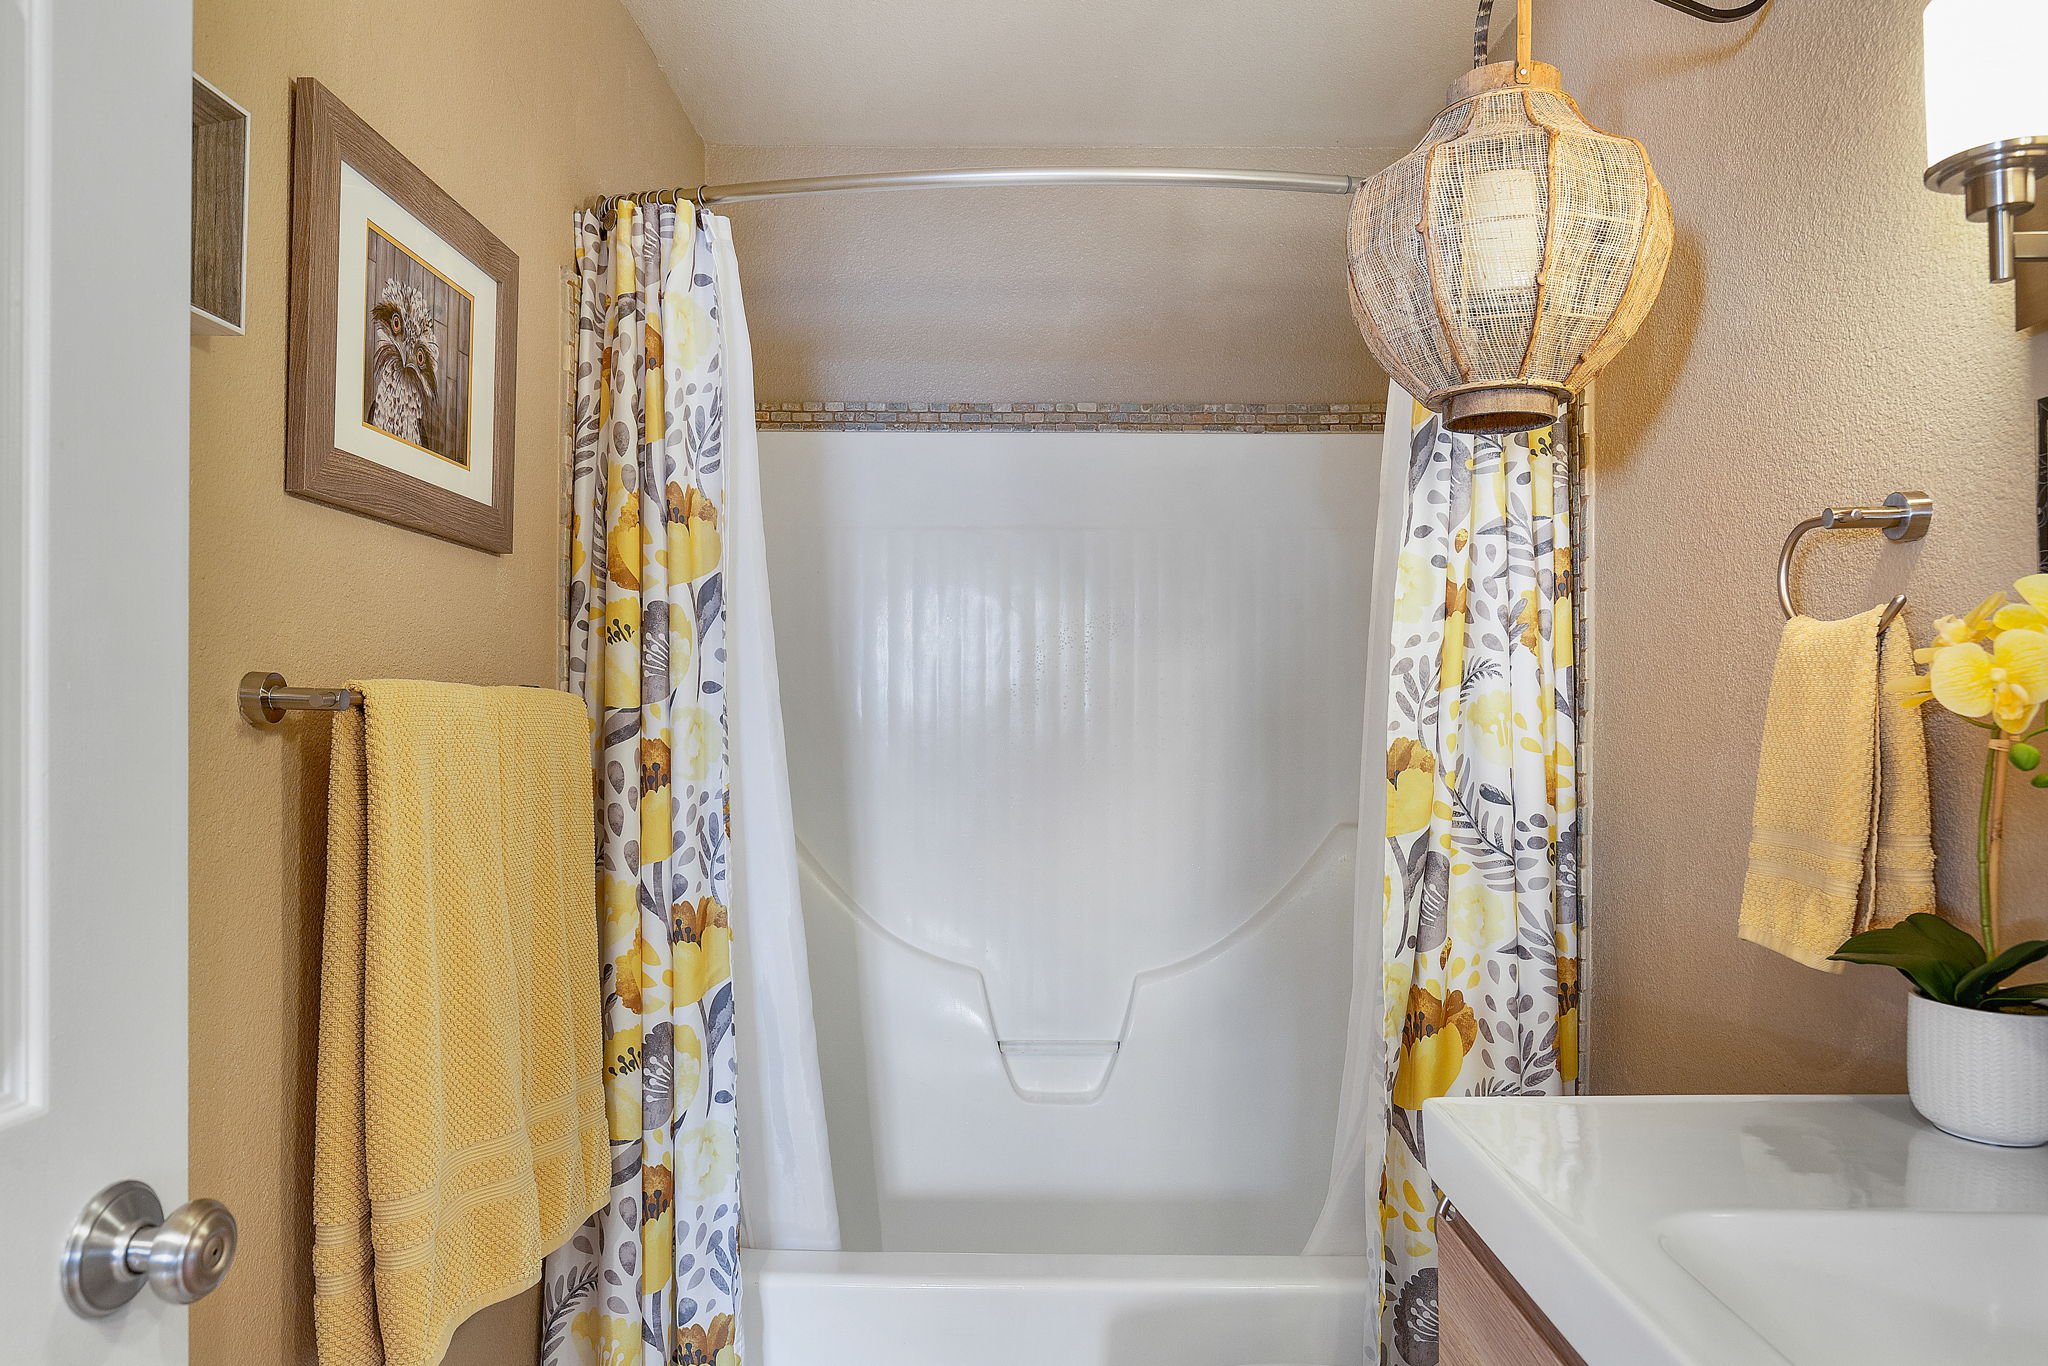  interior of bedroom with shower and bathtub combo  